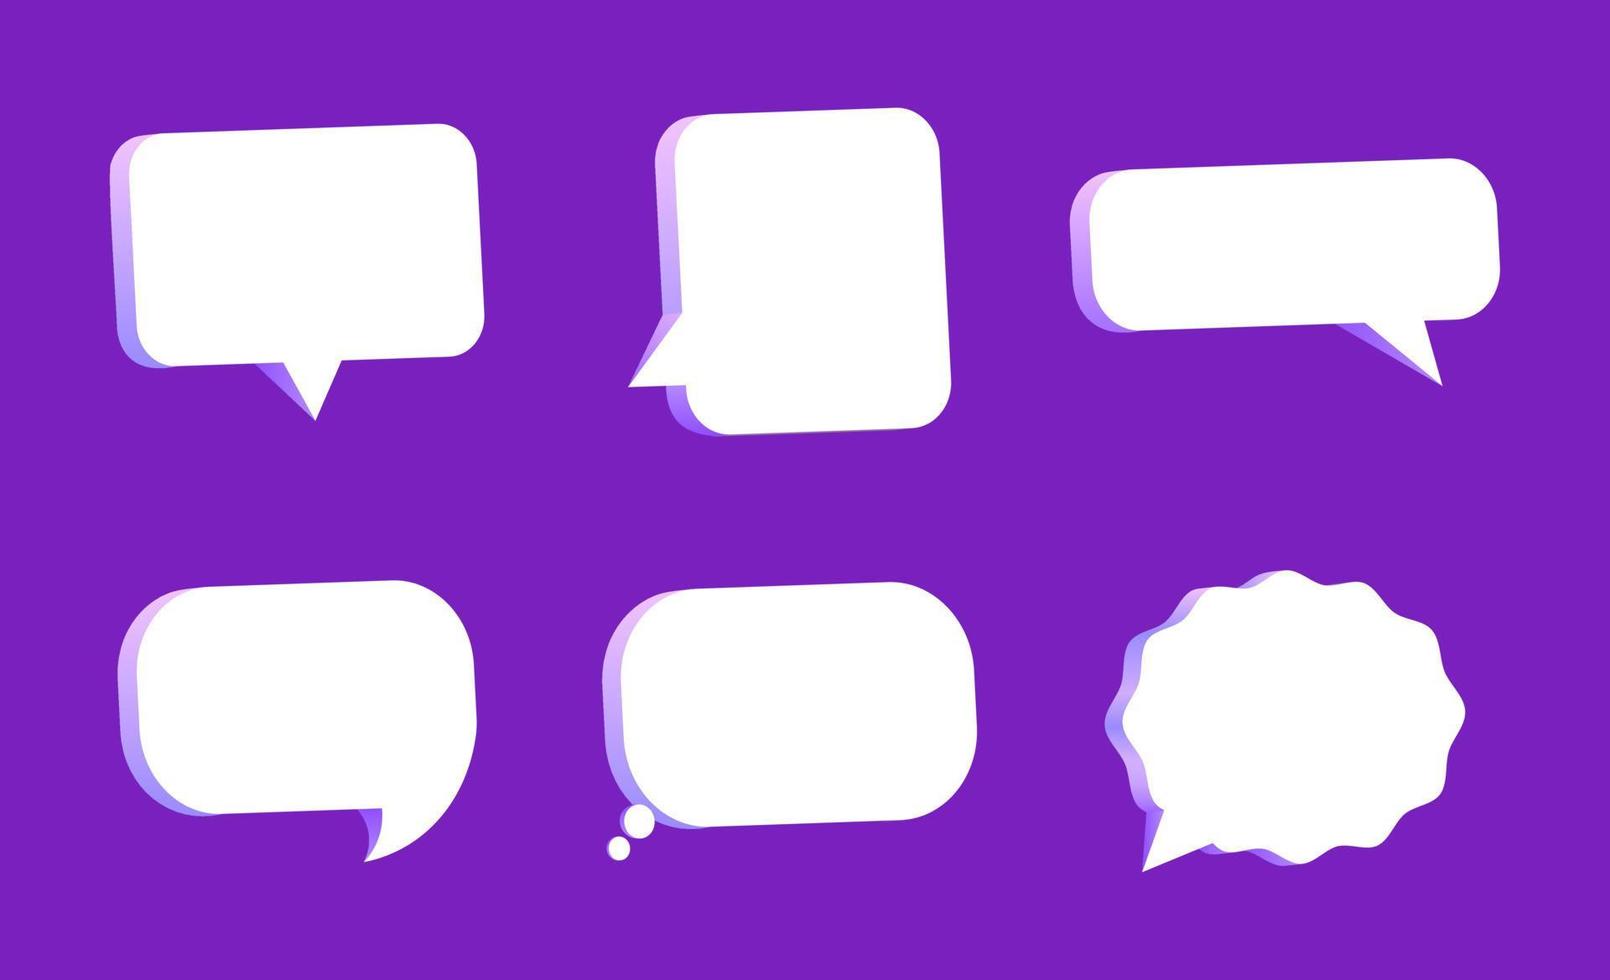 3d purple speech bubble chat icon collection set poster and sticker concept Banner. concept of social media messages. 3d render illustration vector